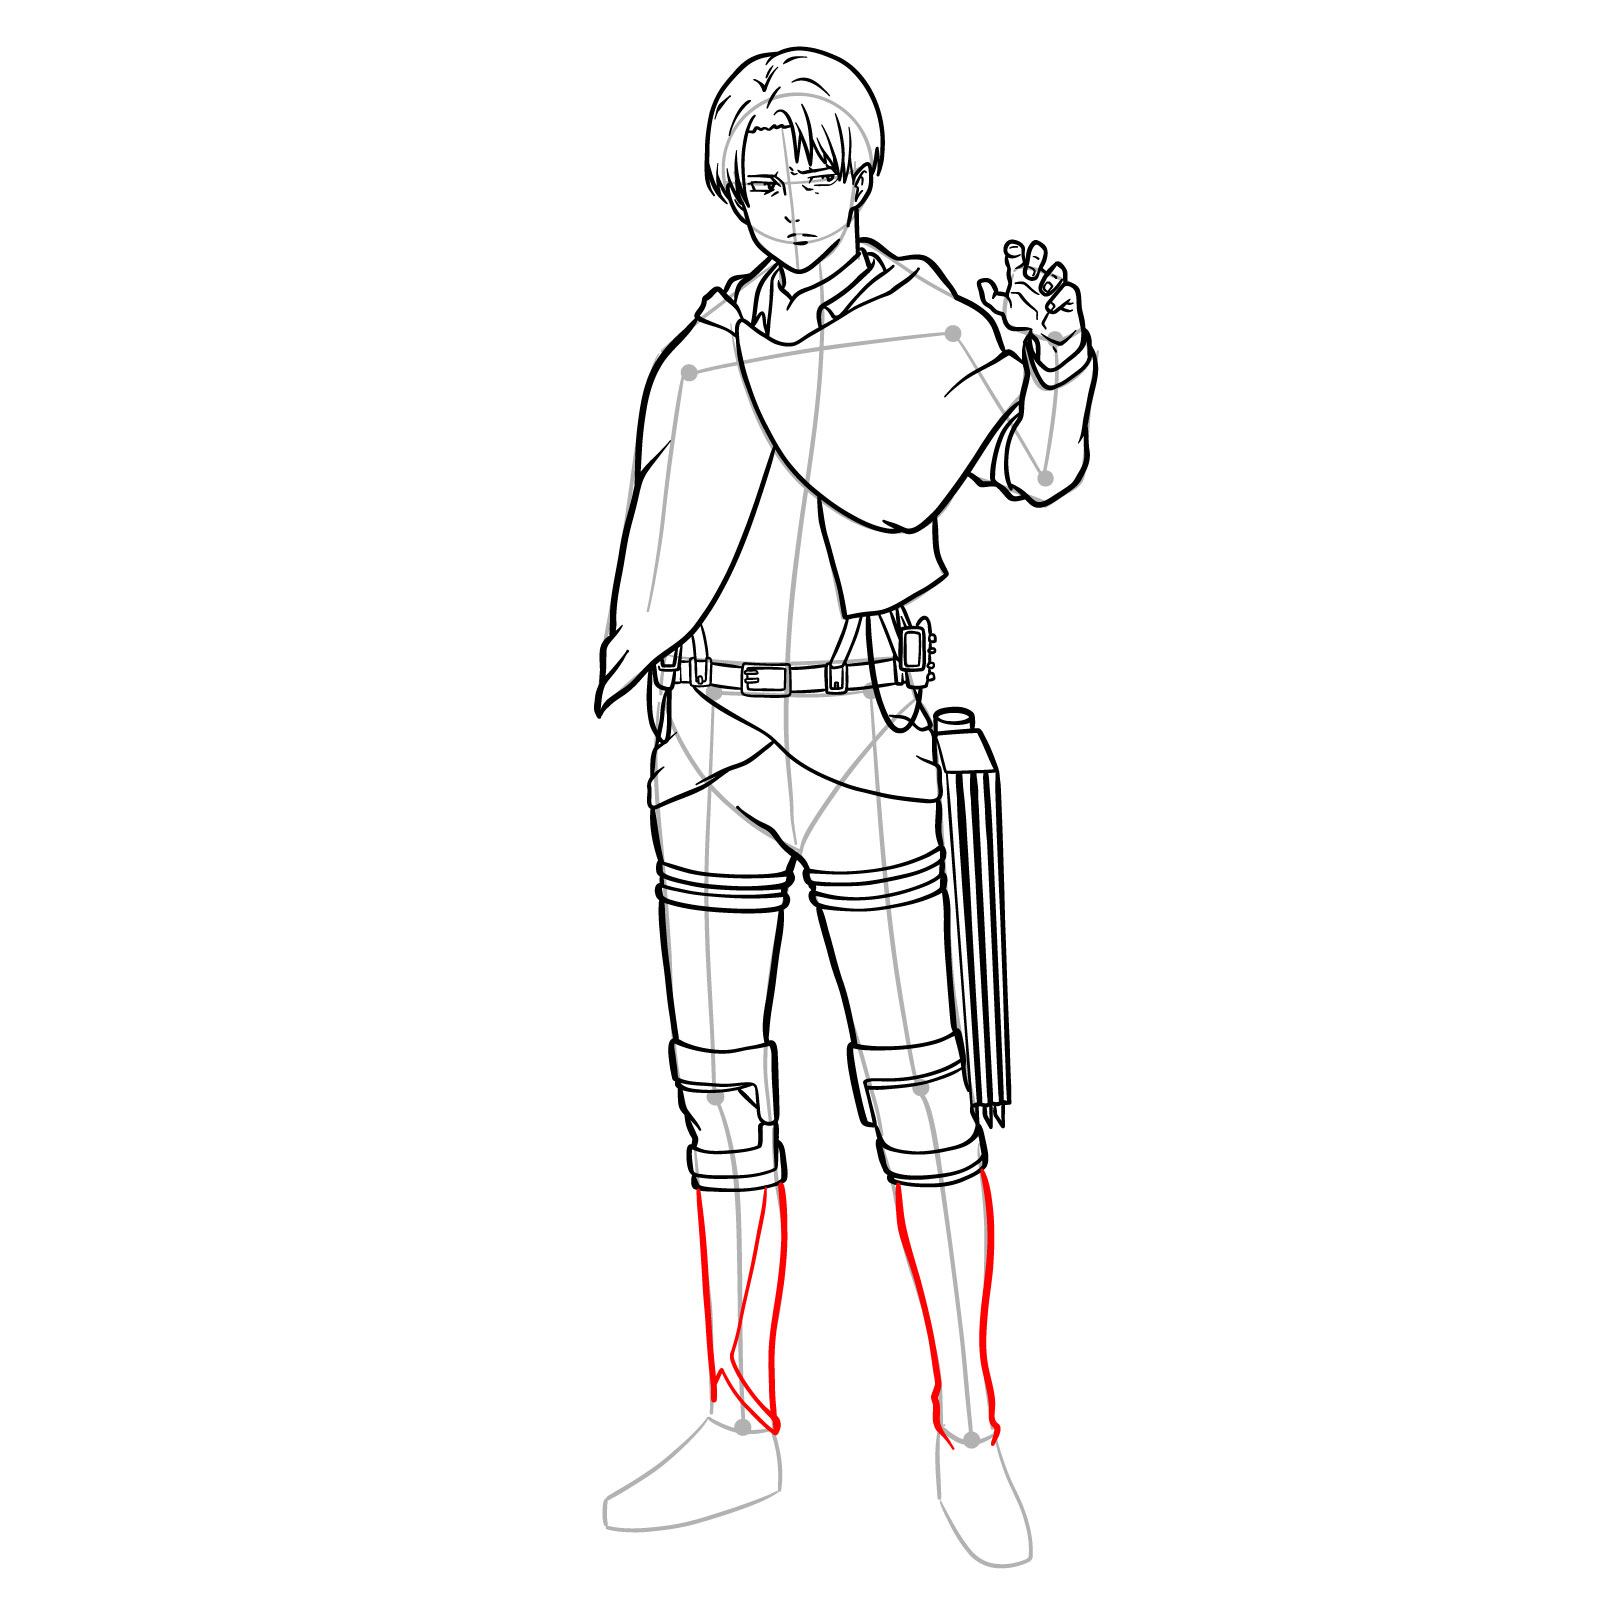 Step-by-step drawing of Levi Ackerman's legs and boots with detailed straps and soles - step 23